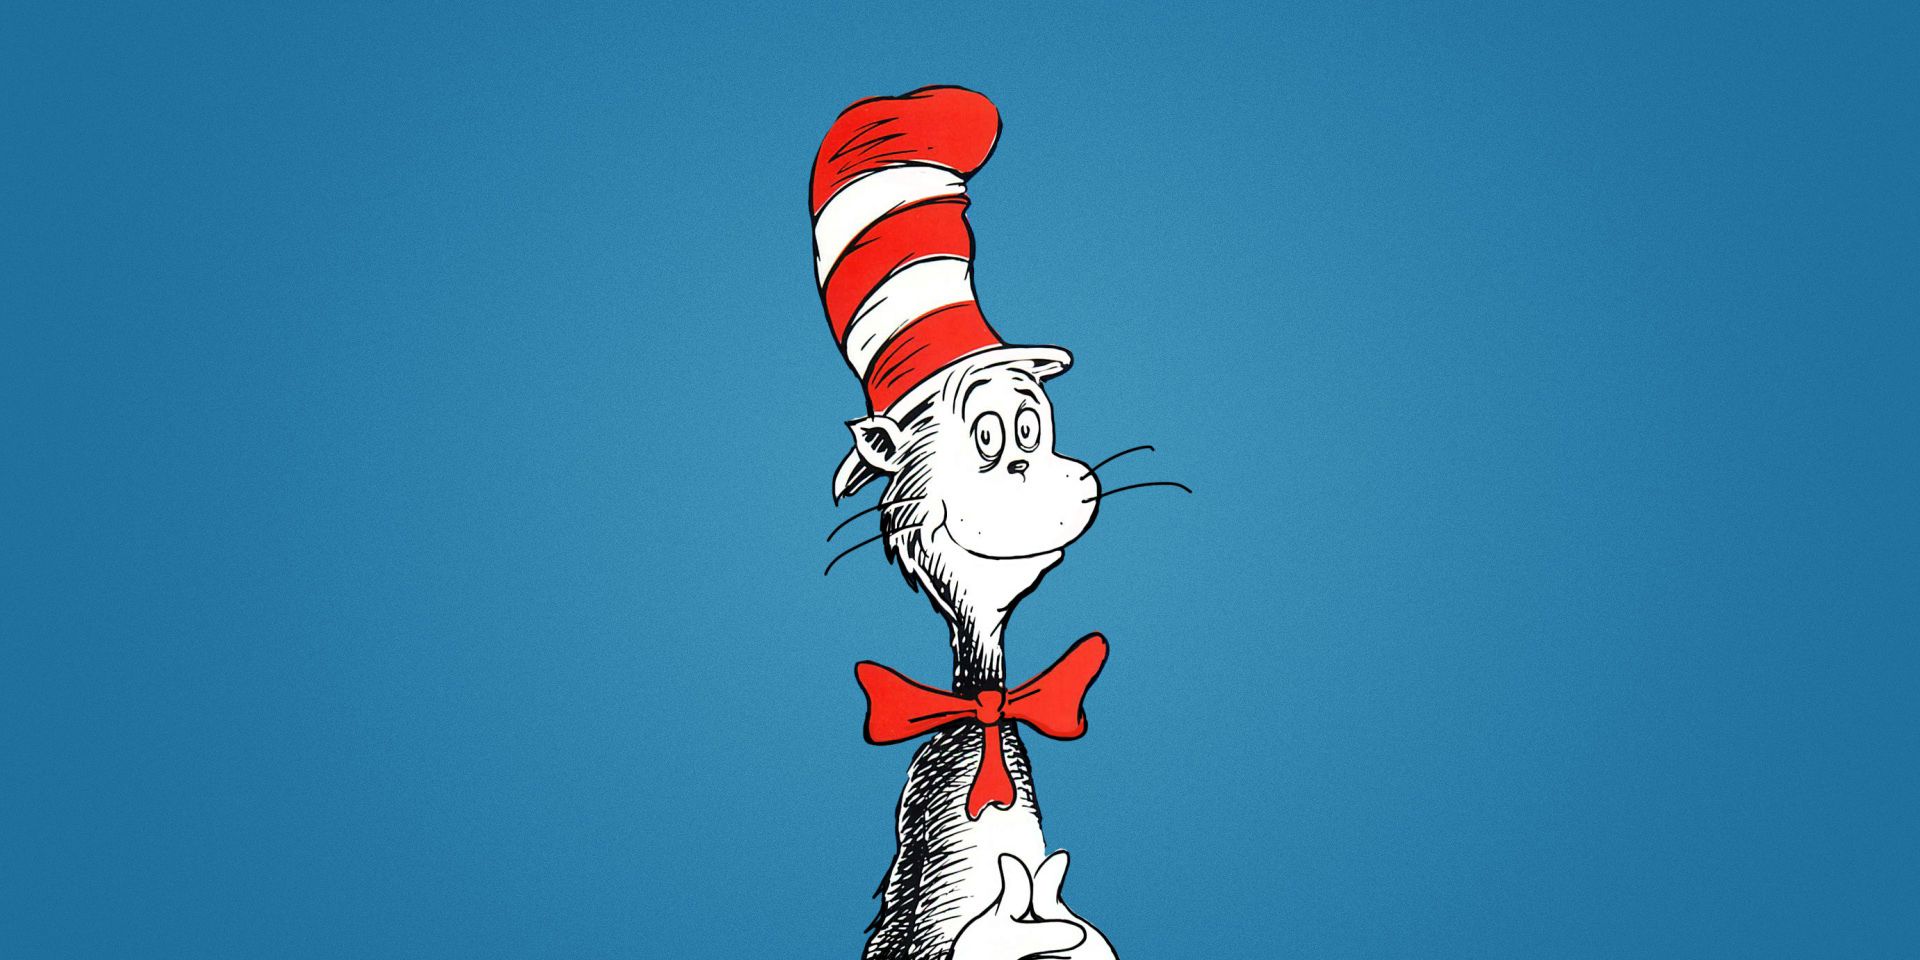 10 Great Gifts For Fans Of DrSeuss